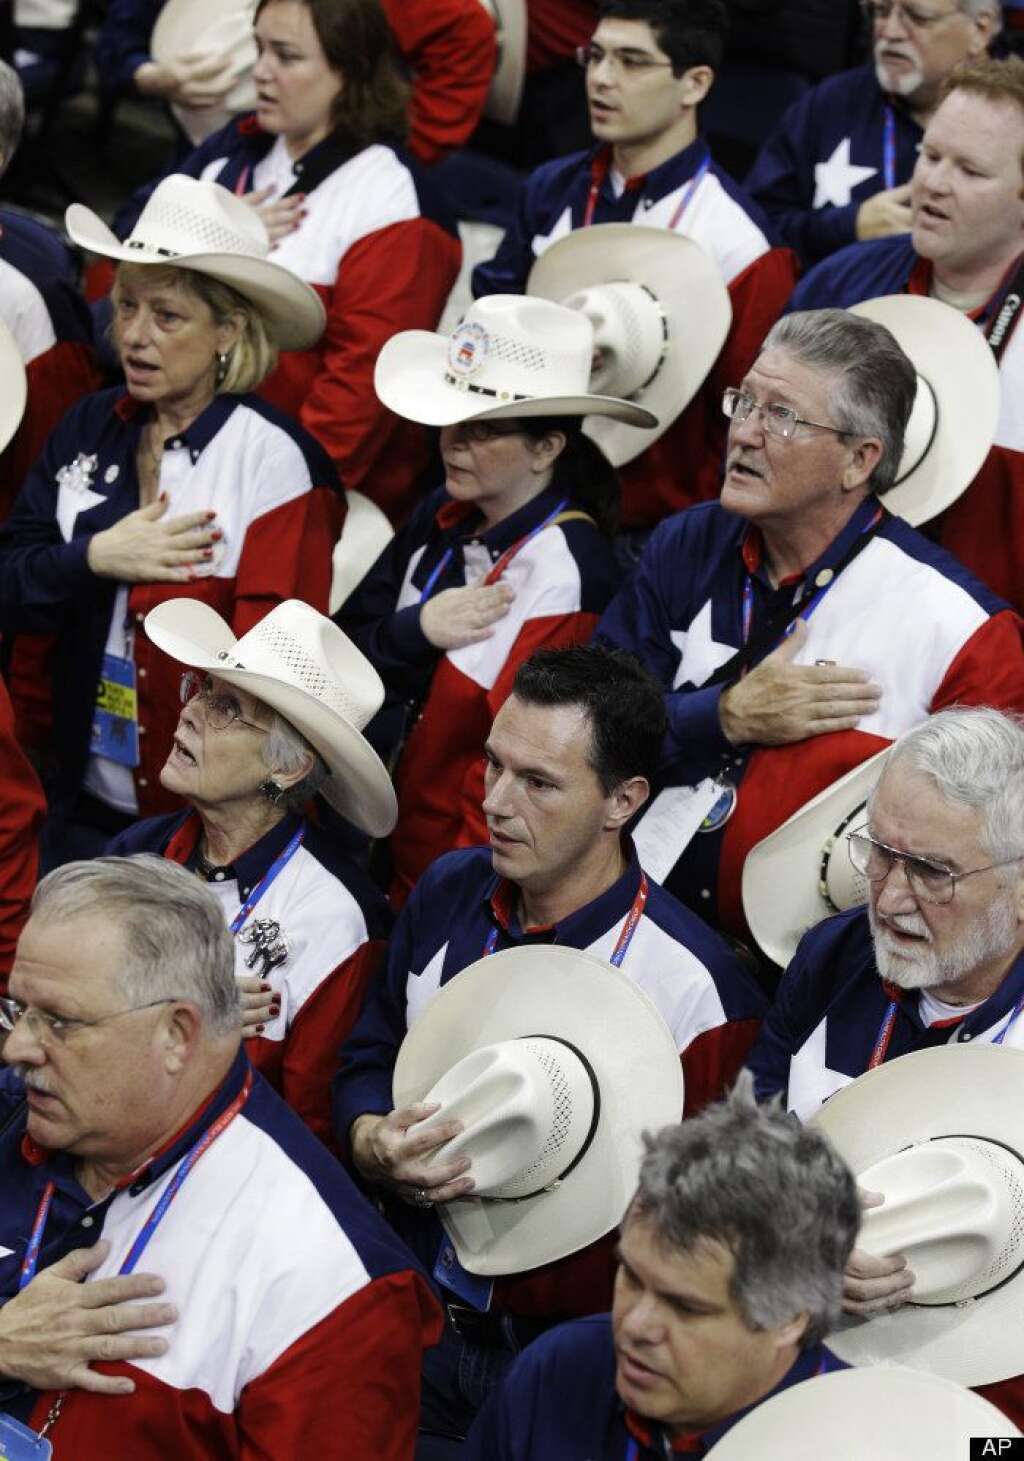 Texas delegates recite the Pledge of Allegiance during the Republican National Convention in Tampa, Fla., on Tuesday, Aug. 28, 2012. (AP Photo/Charlie Neibergall)